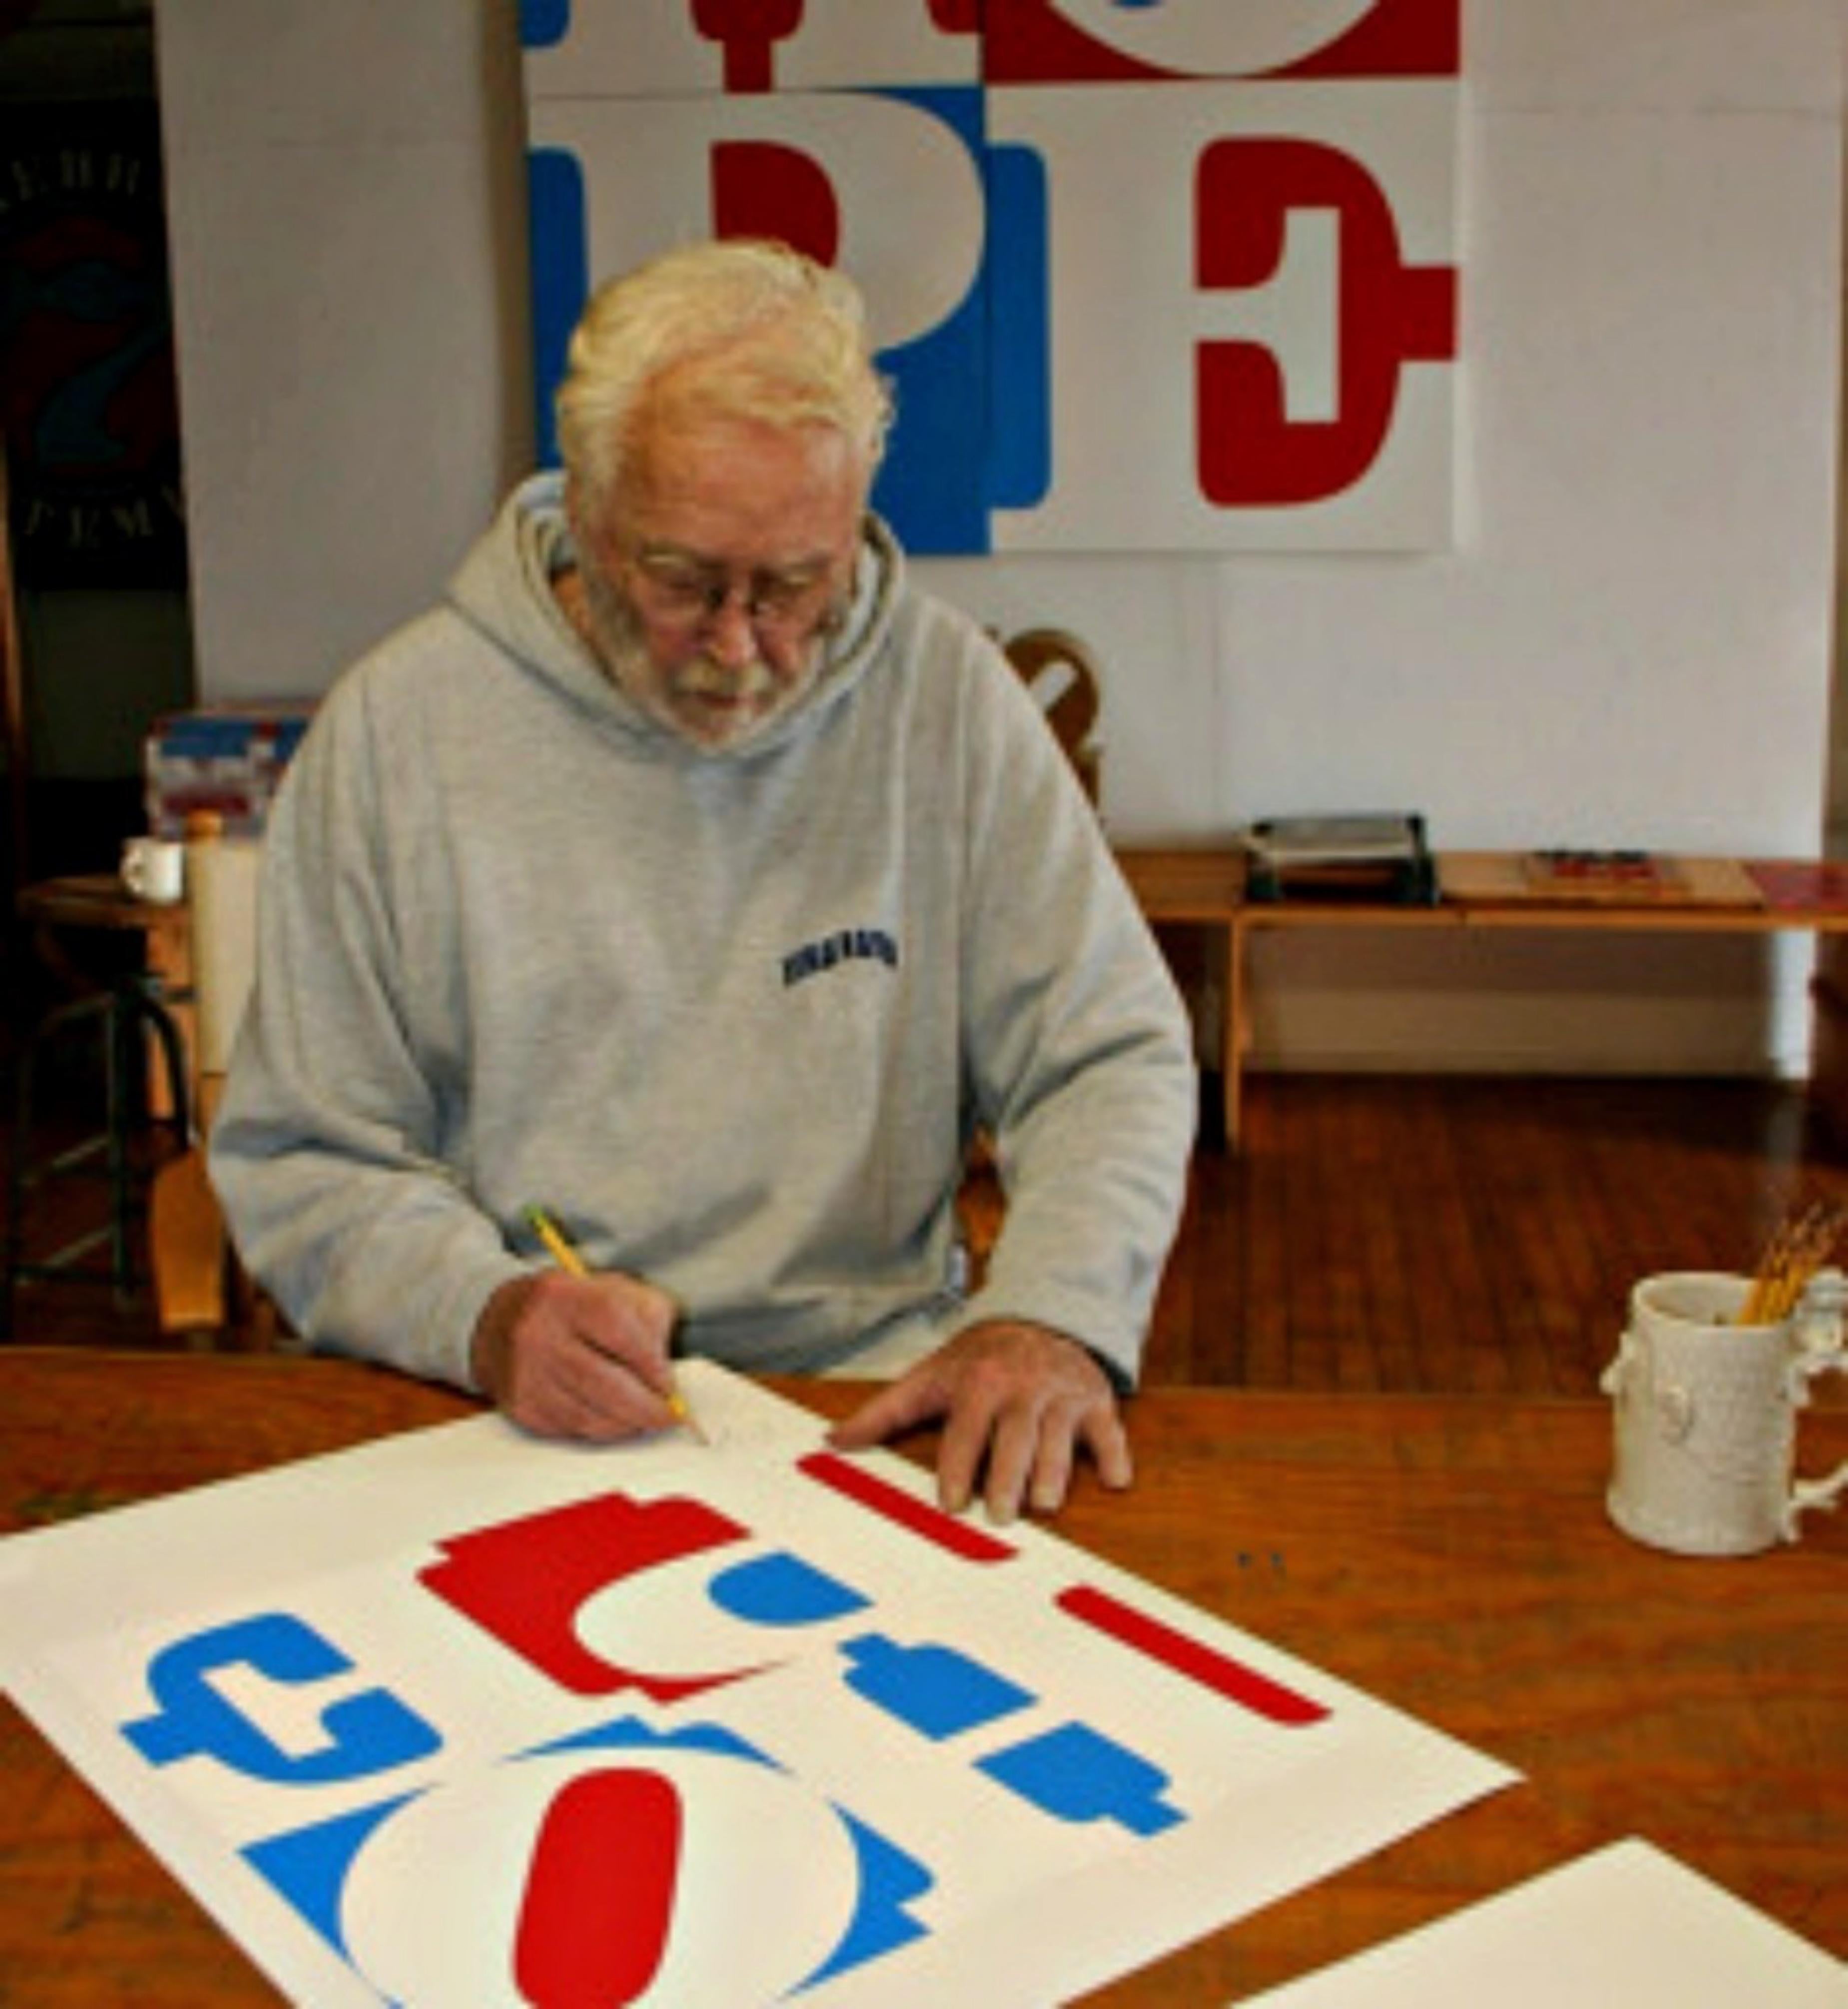 HOPE, signed and numbered silkscreen from Artists for Obama portfolio 138/200  - Print by Robert Indiana